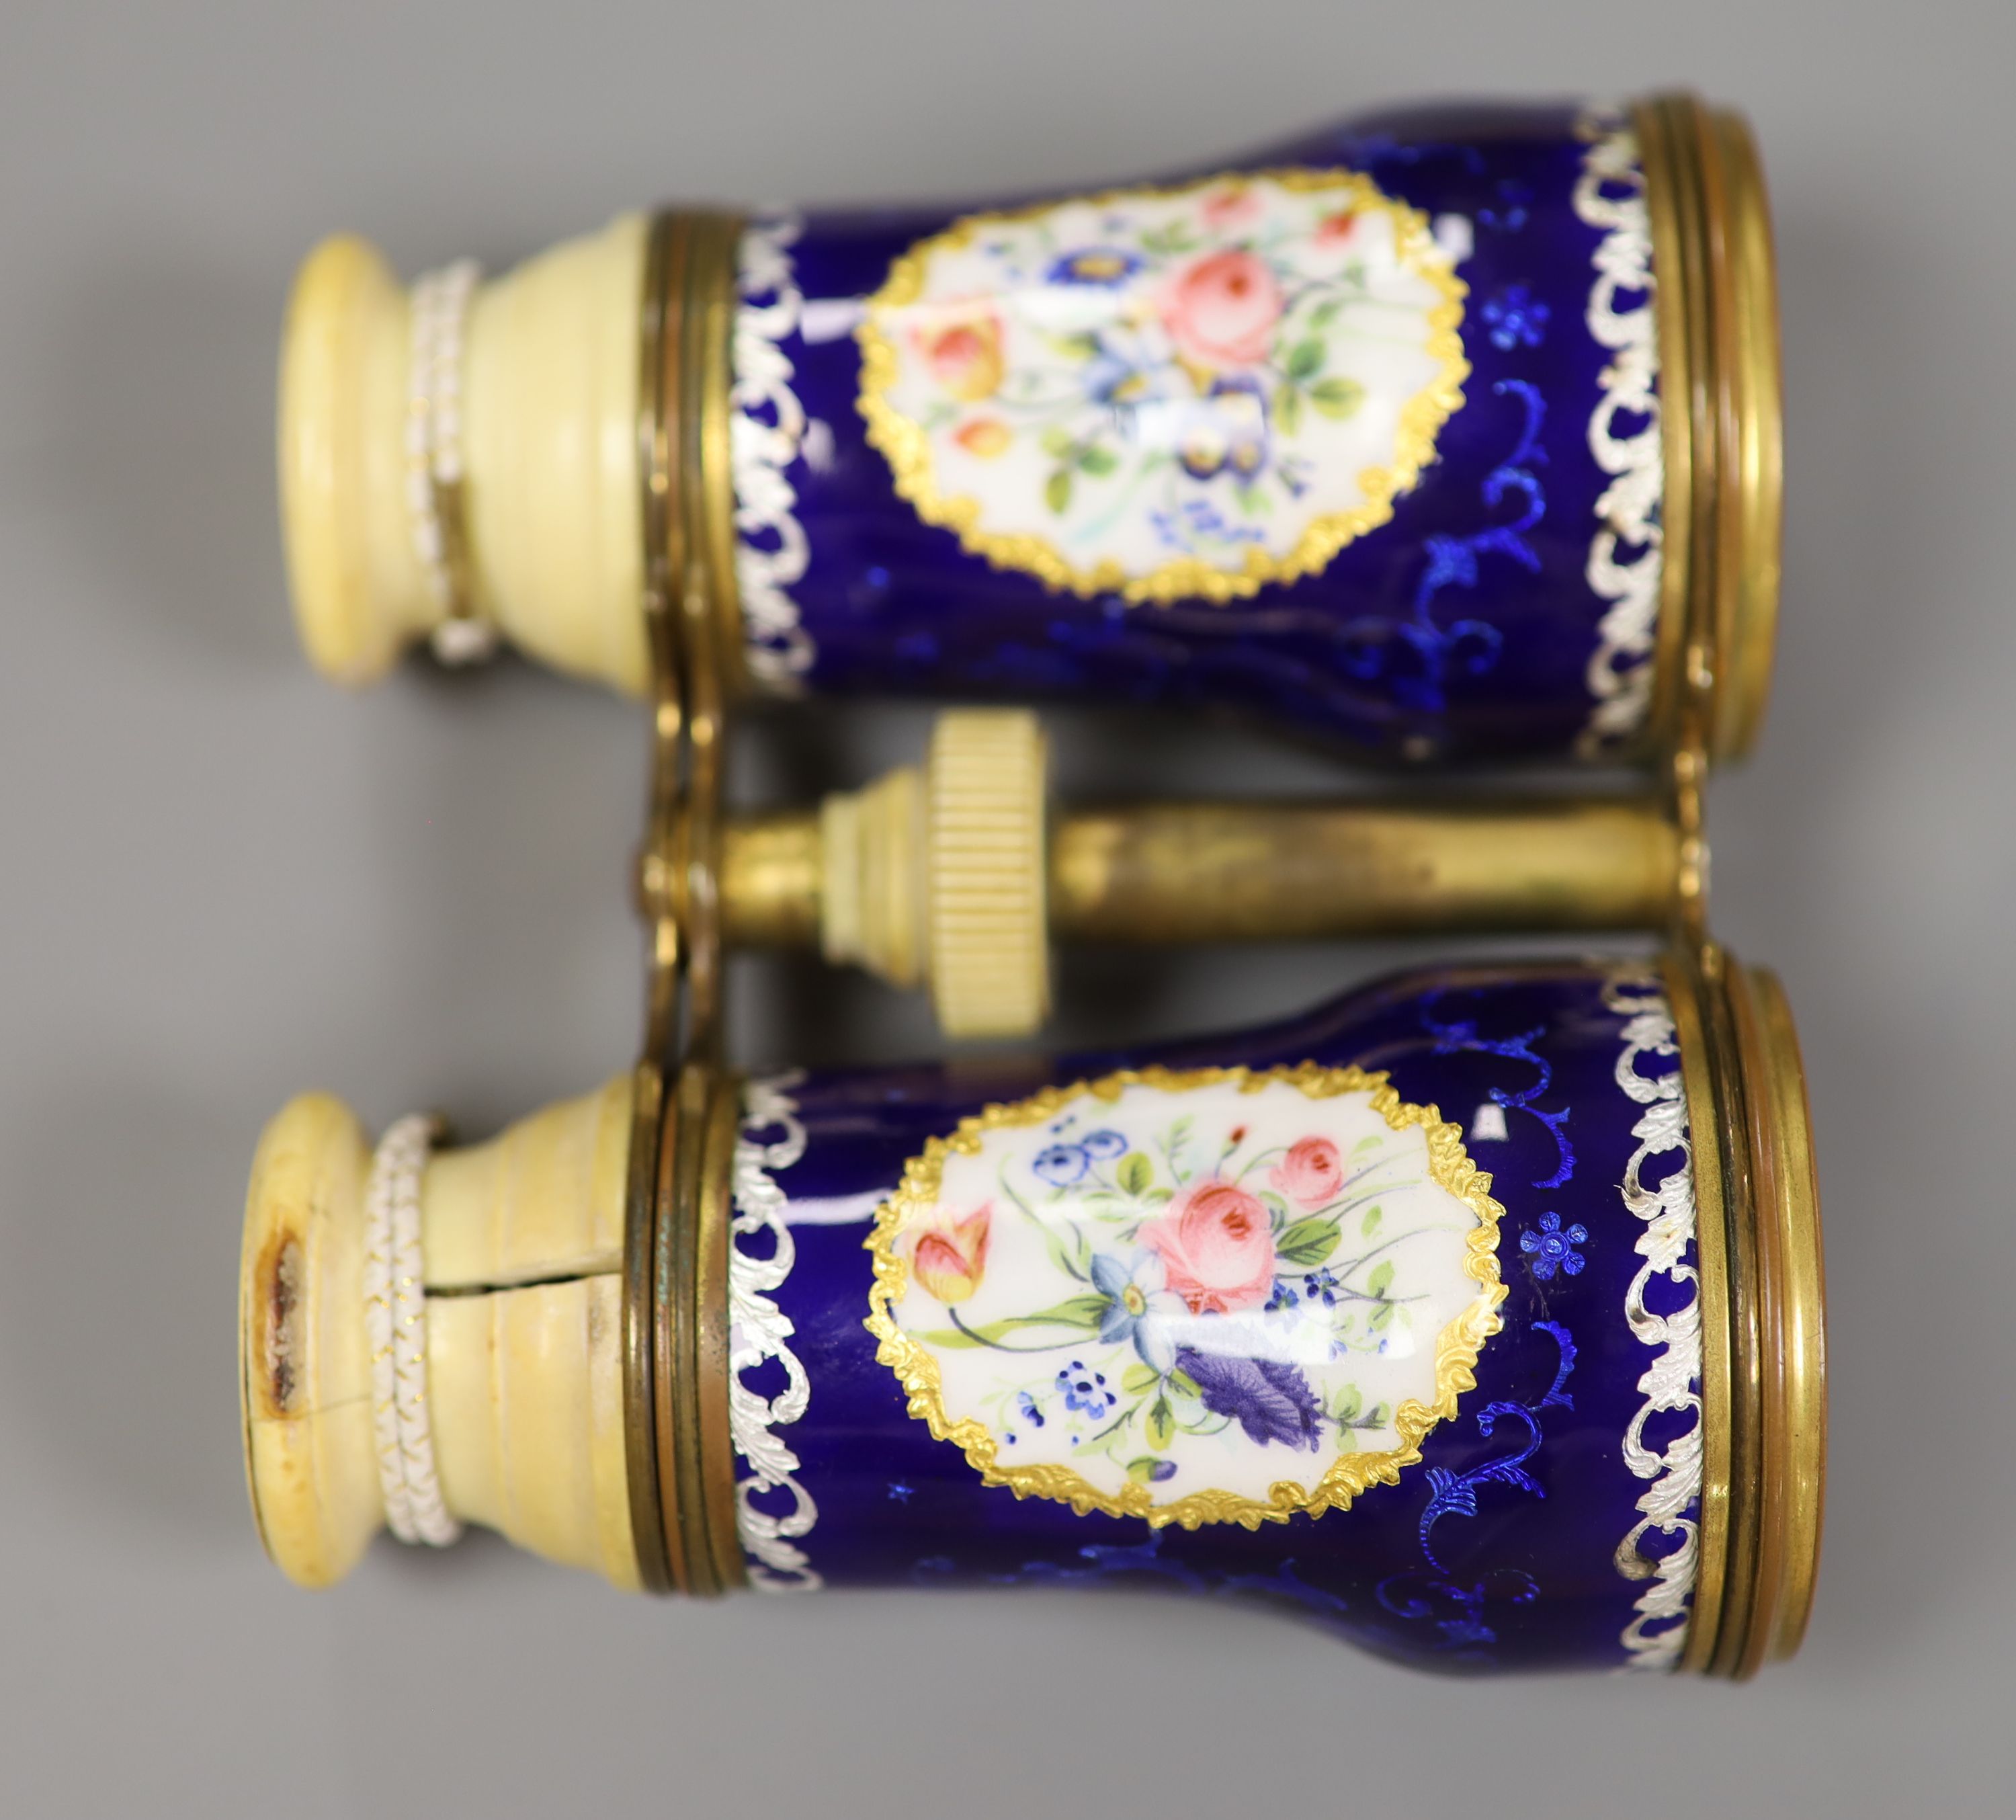 A pair of enamel and ivory opera glasses